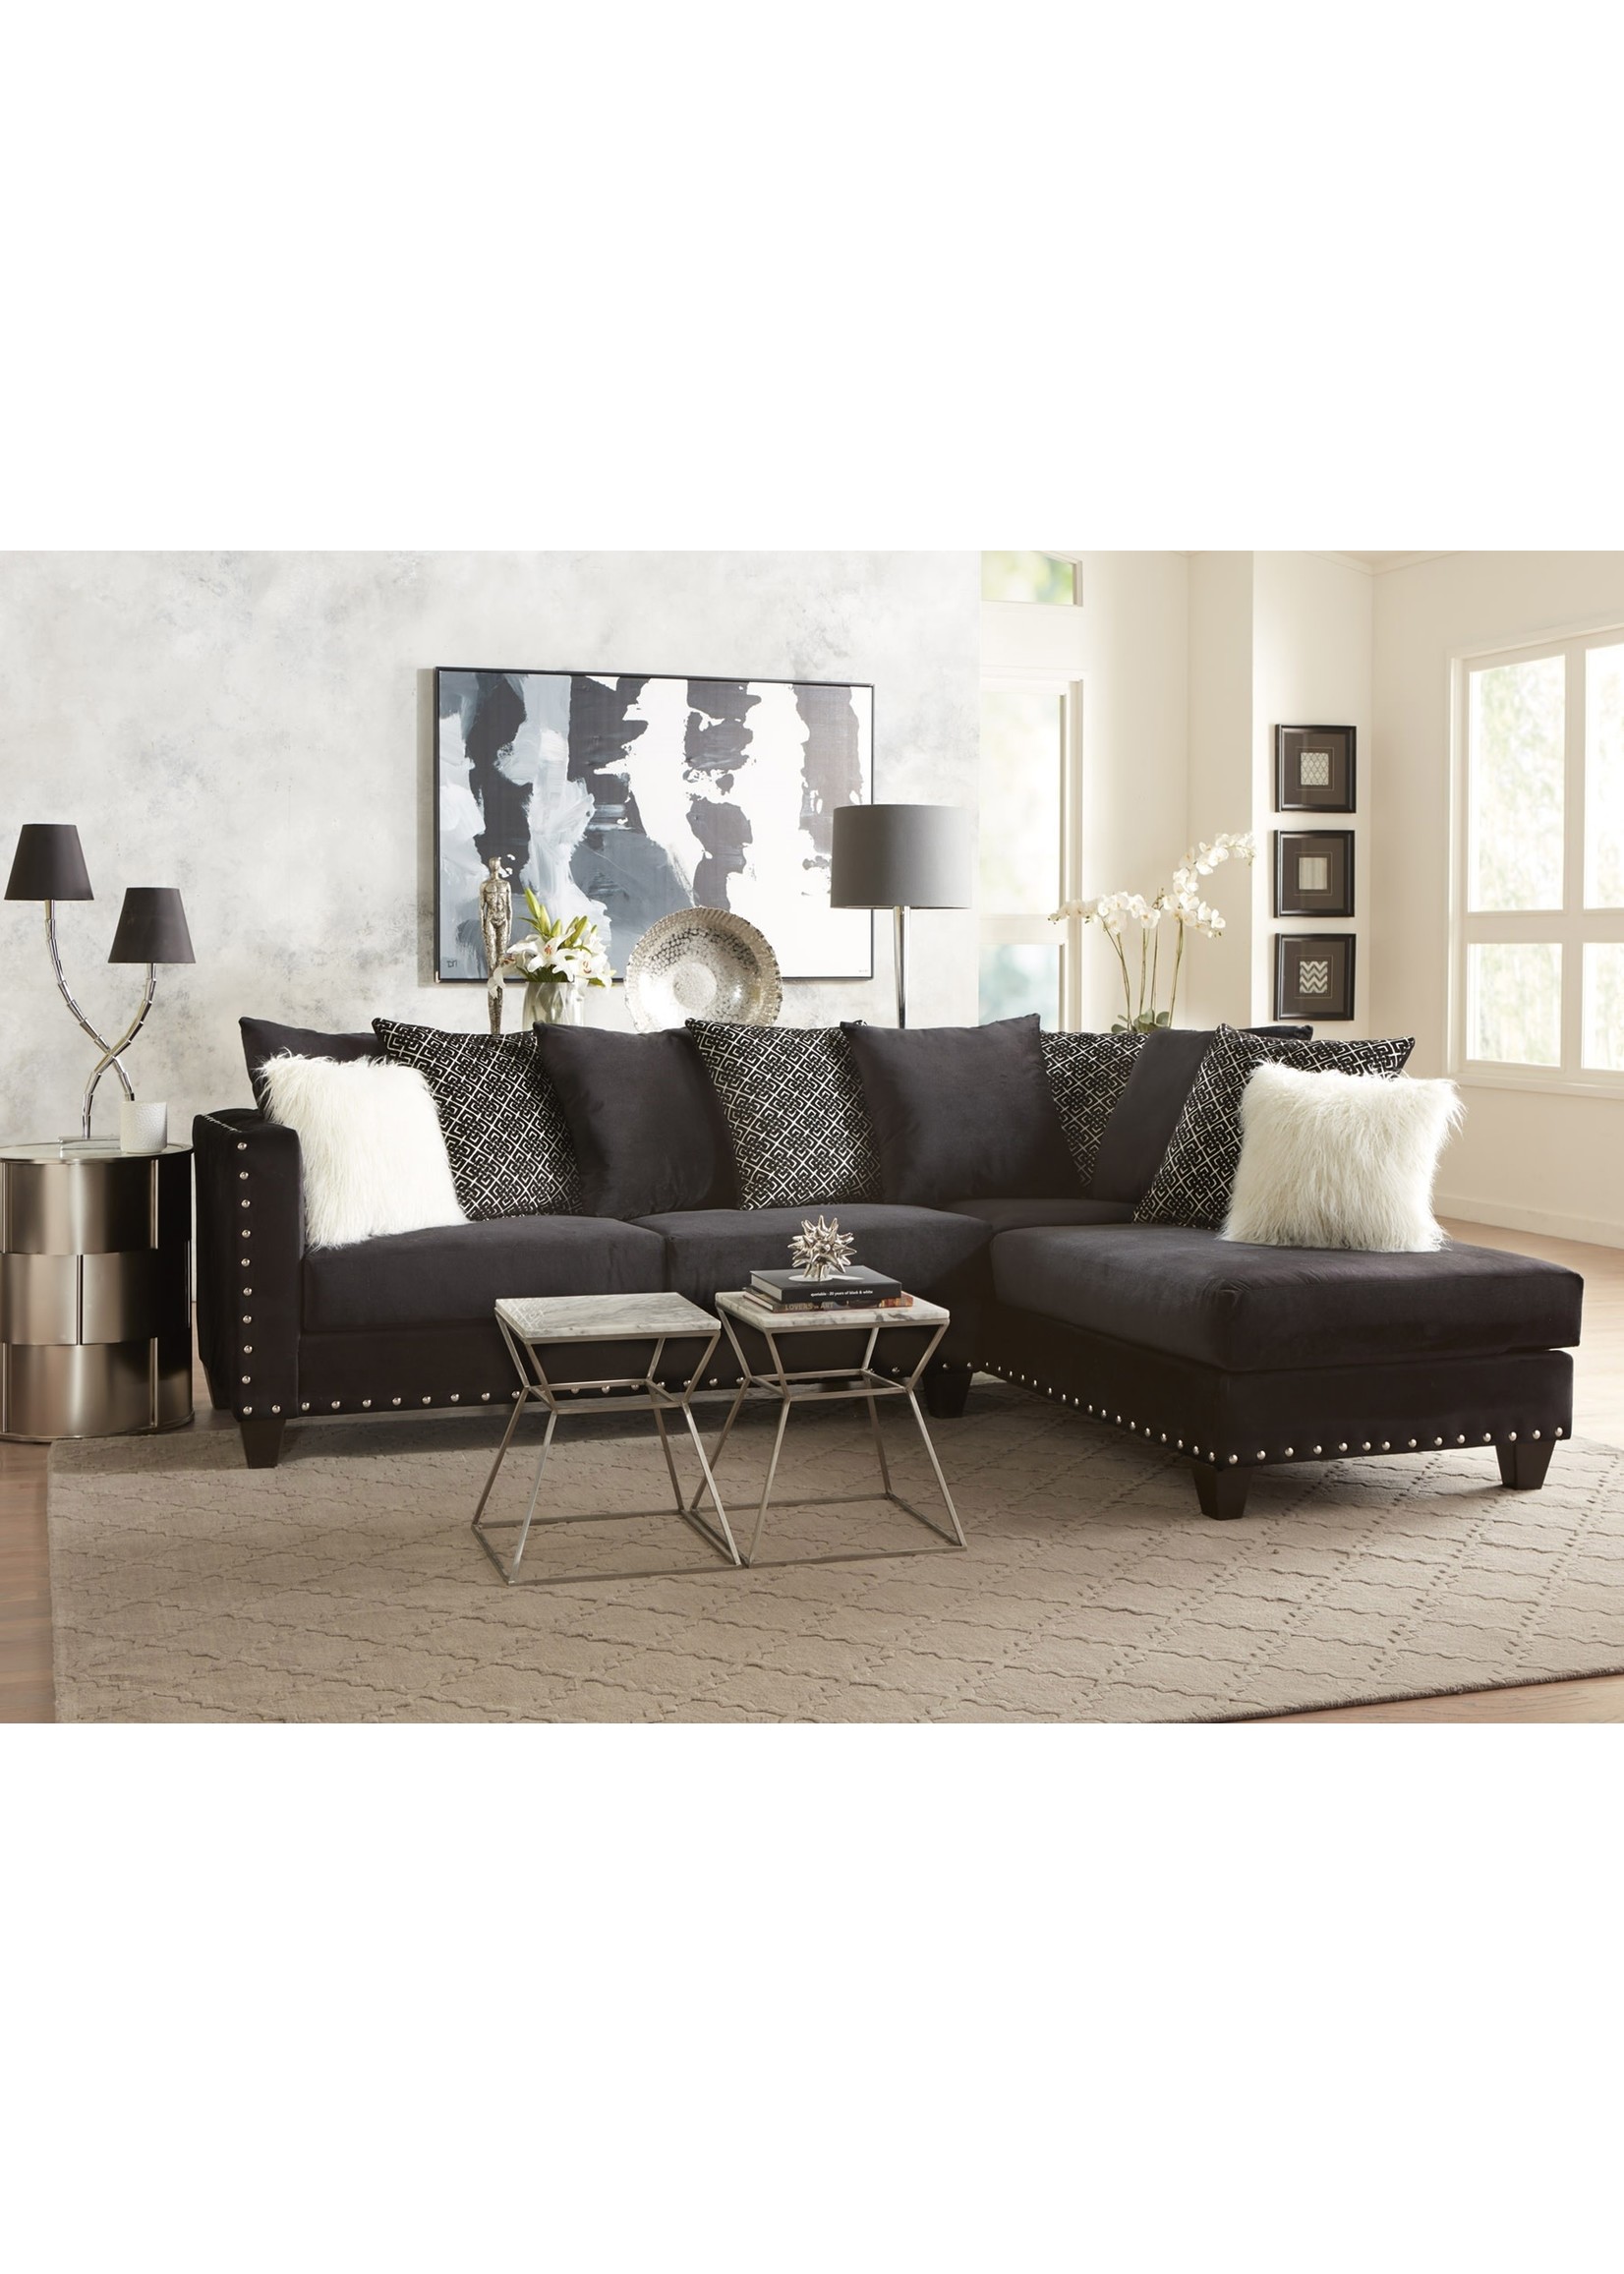 2019 CHARCOAL SECTIONAL